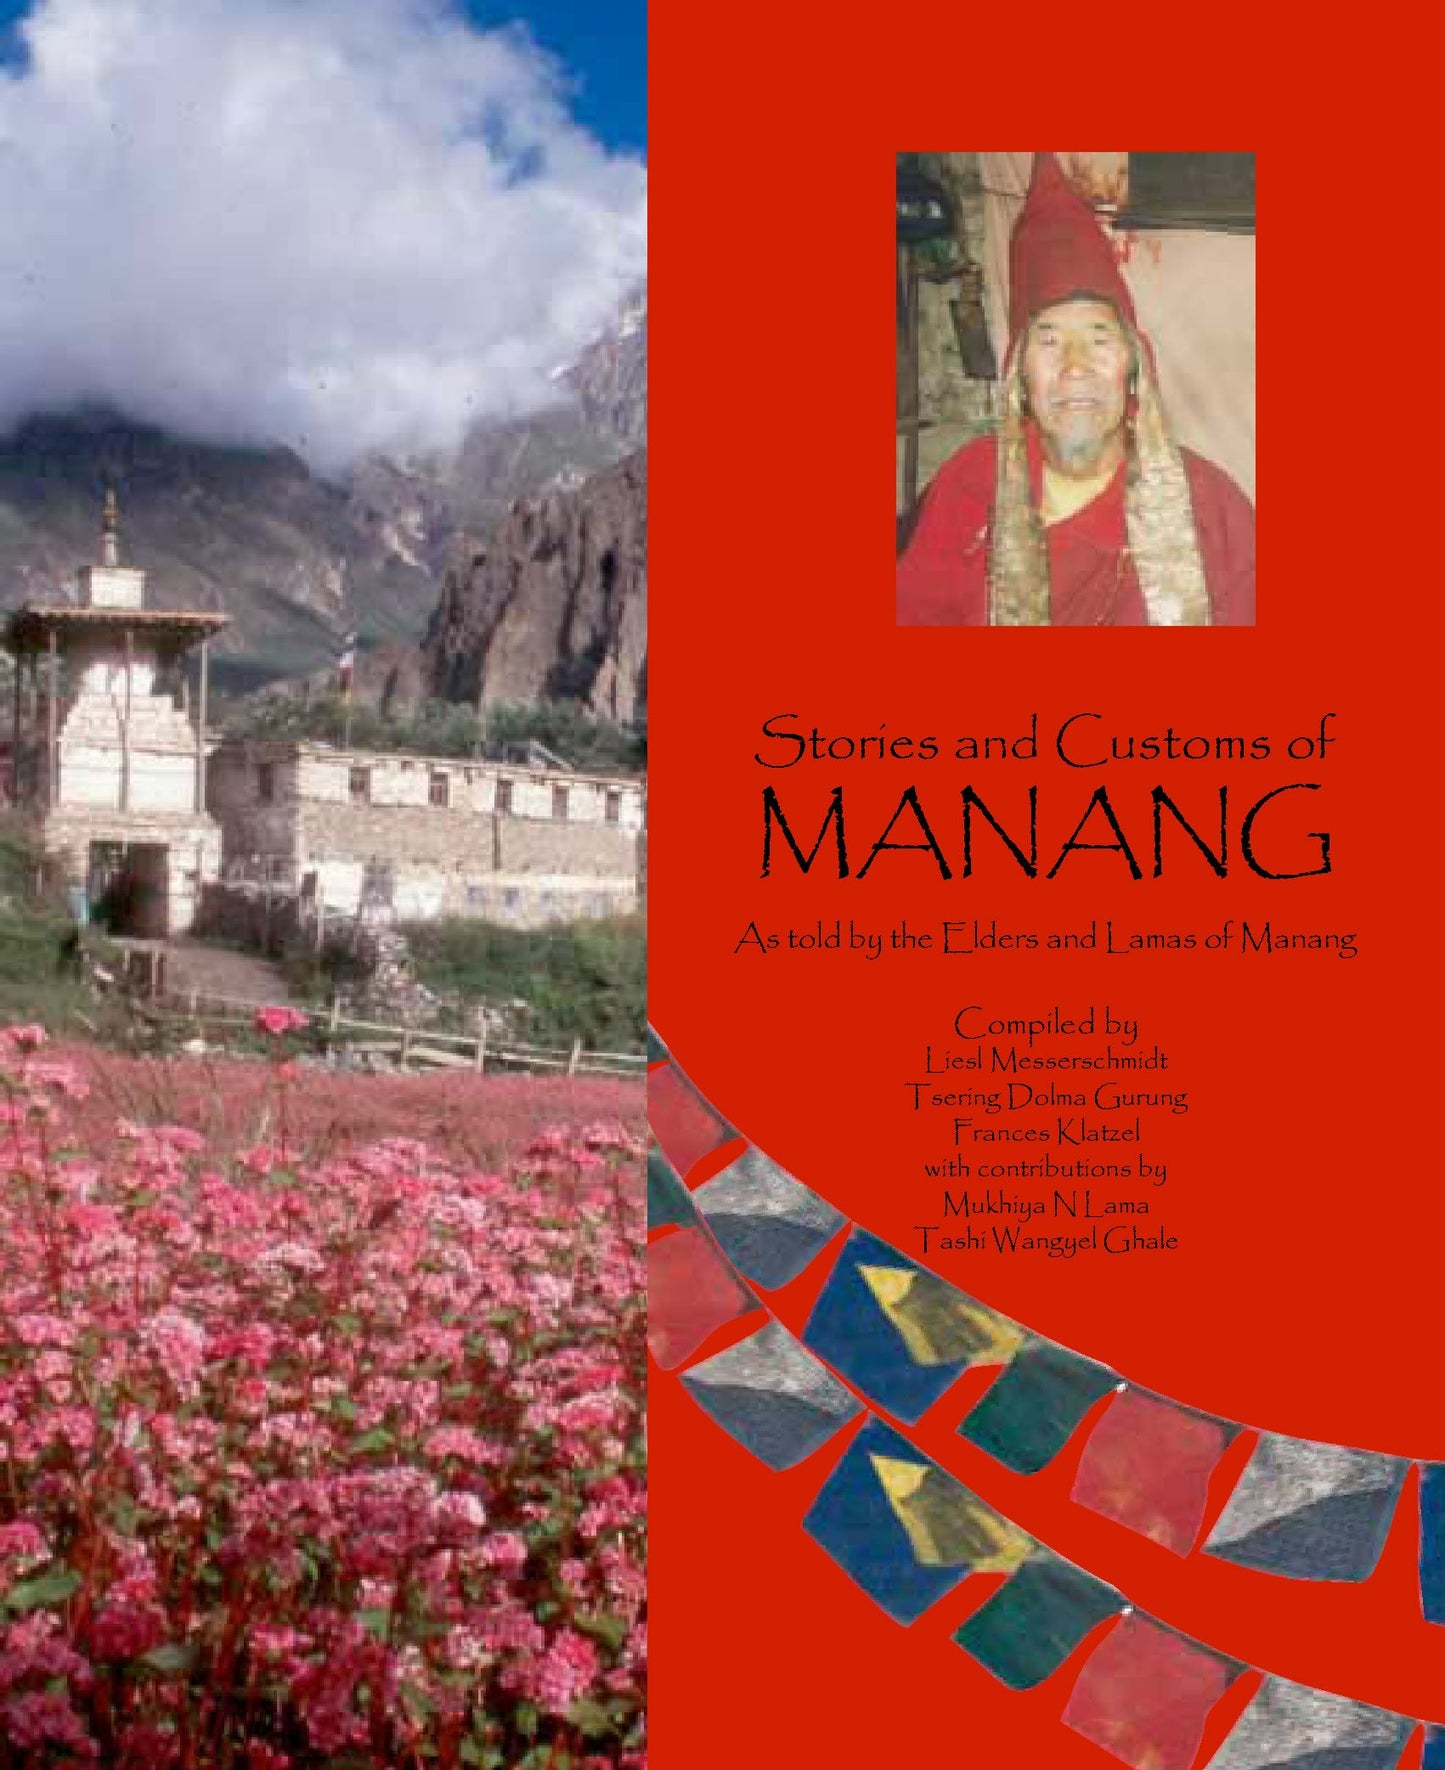 Stories and Customs of Manang: As told by the Lamas and Eldest of Manang